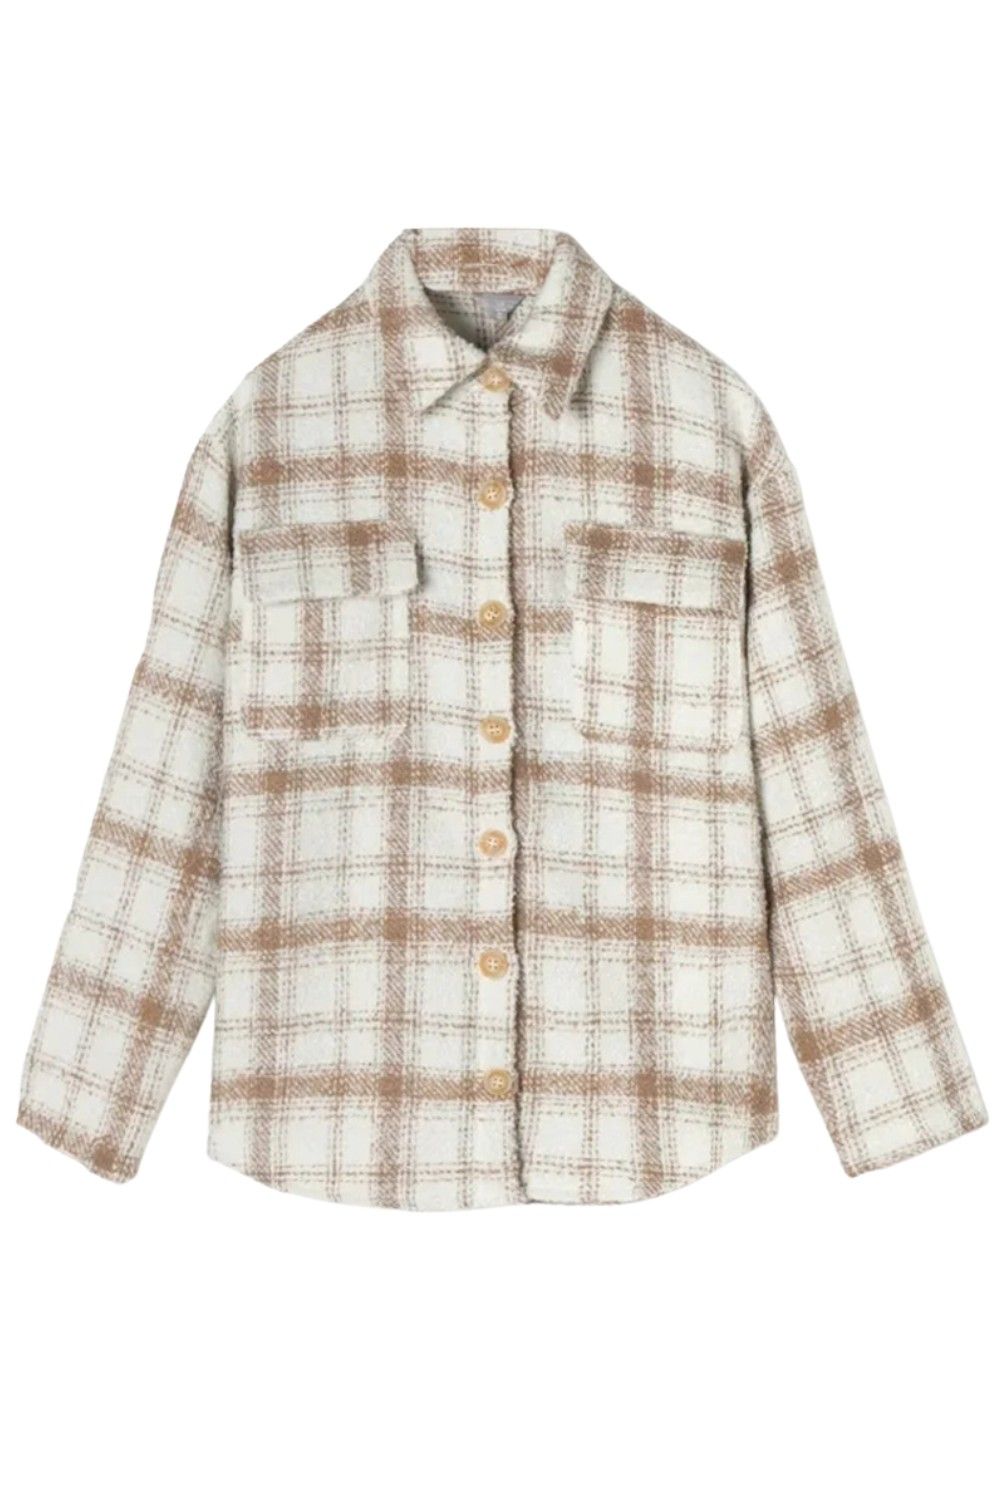 'CANDY' THICK PLAID SHIRT WITH POCKETS | Goodnight Macaroon